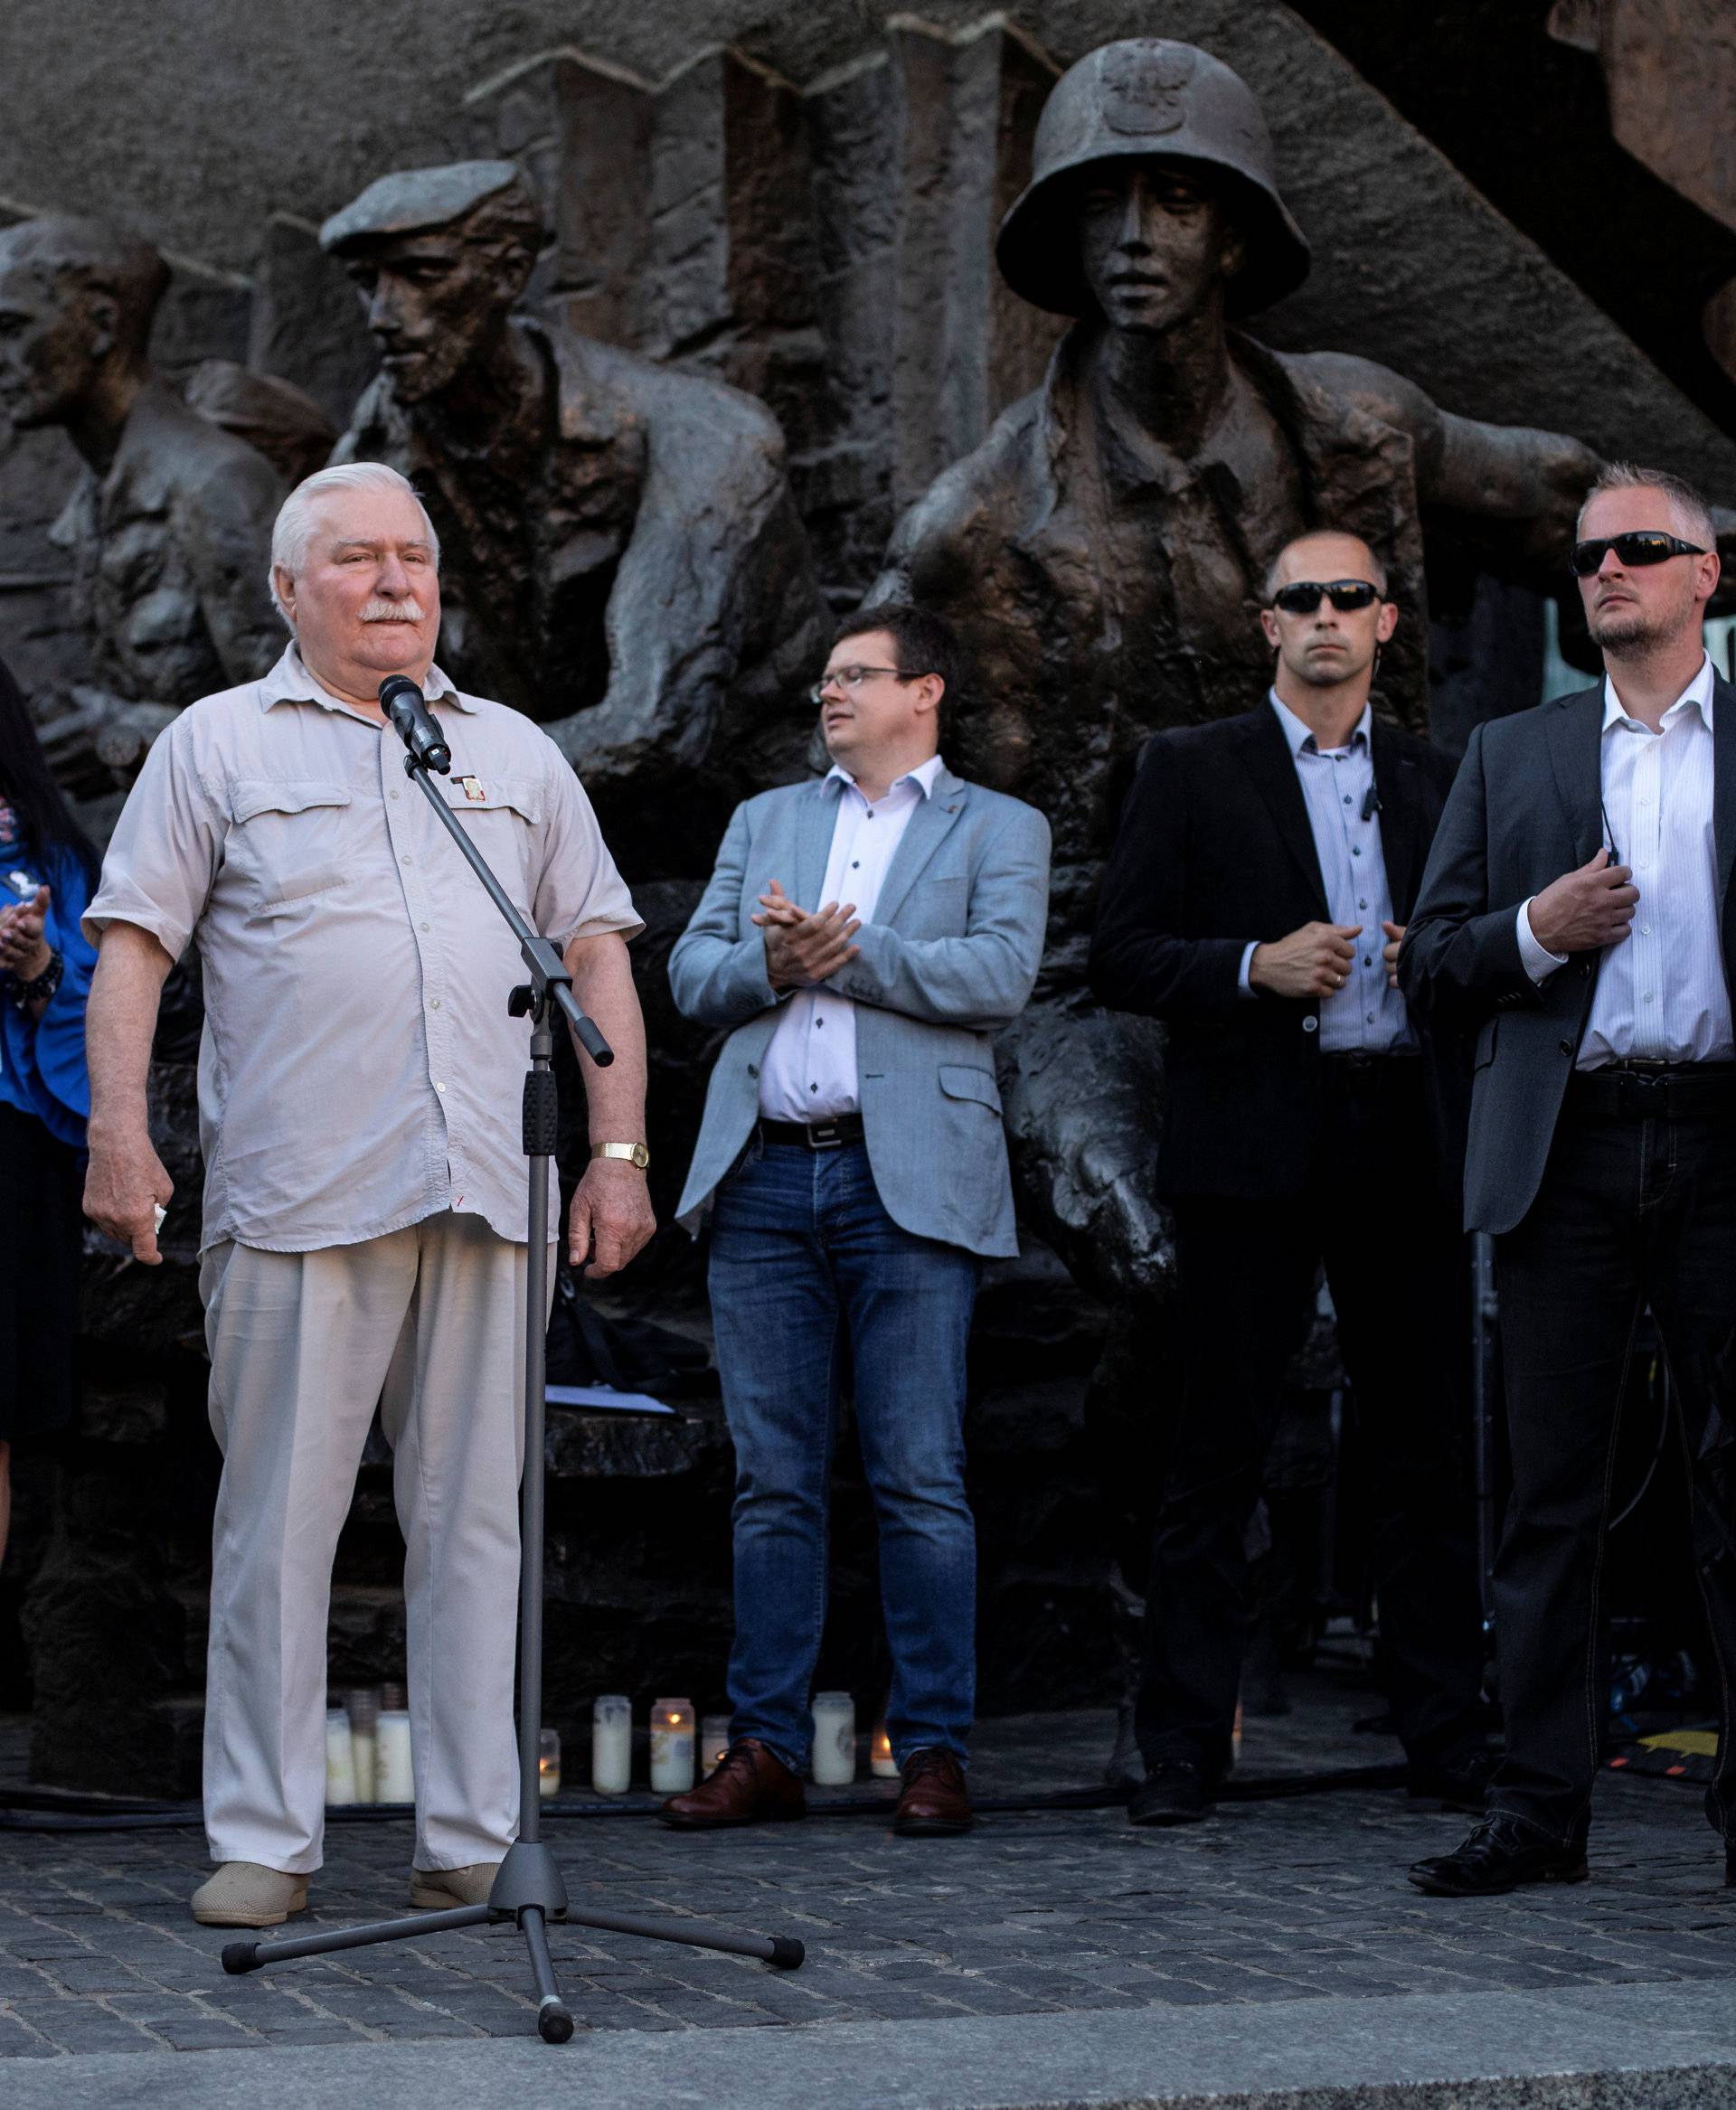 Former Polish President Lech Walesa speaks during a protest against the conservative government's makeover of the Polish judiciary in Warsaw